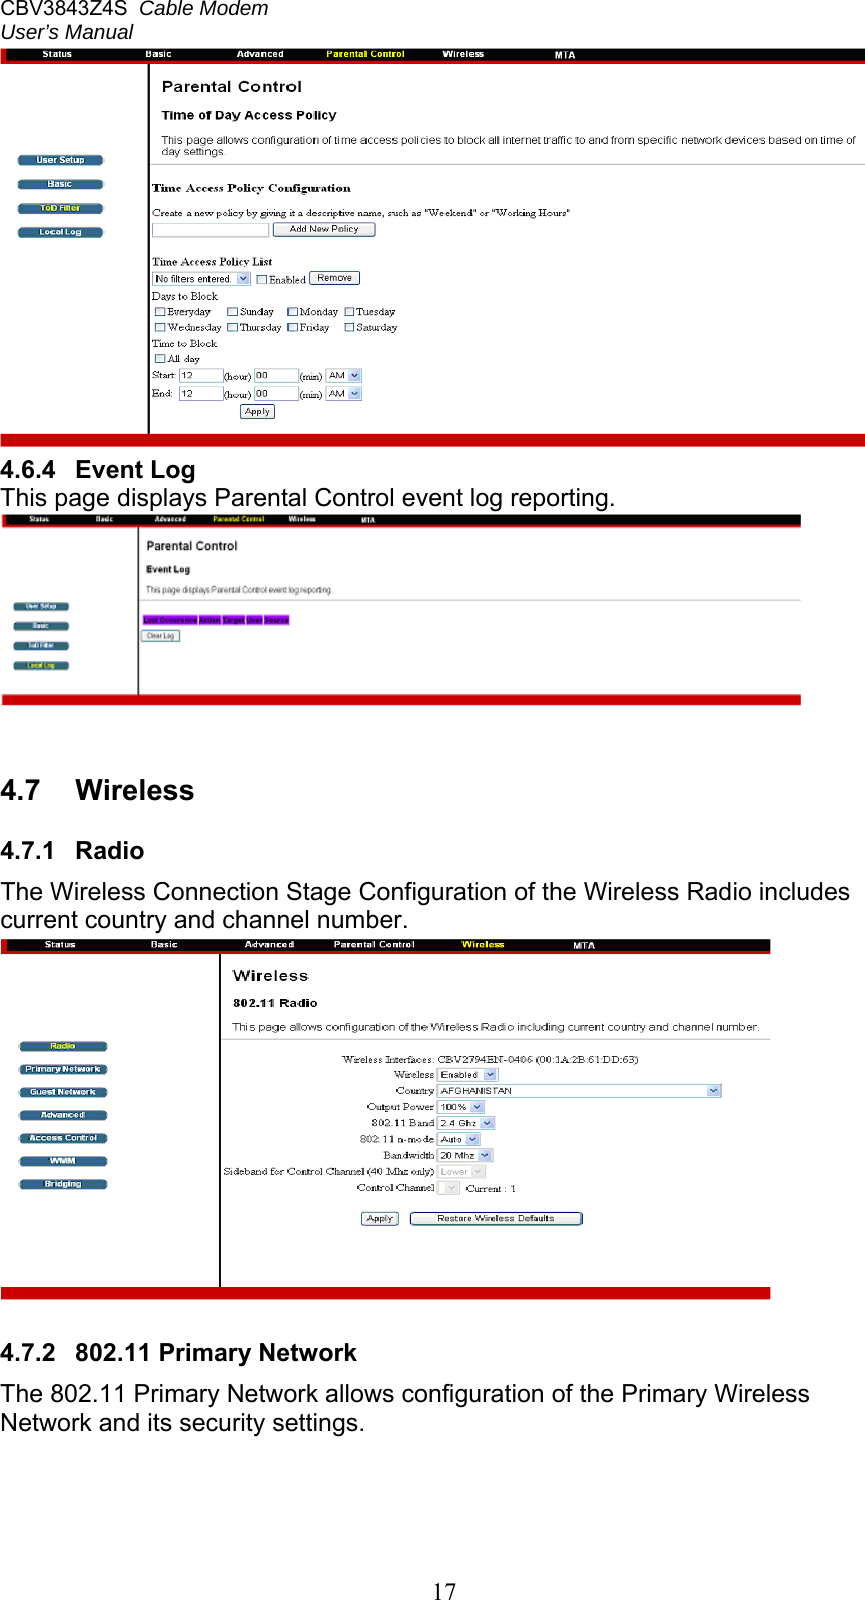 CBV3843Z4S  Cable Modem  User’s Manual   17 4.6.4   Event Log  This page displays Parental Control event log reporting.   4.7  Wireless  4.7.1  Radio  The Wireless Connection Stage Configuration of the Wireless Radio includes current country and channel number.   4.7.2  802.11 Primary Network  The 802.11 Primary Network allows configuration of the Primary Wireless Network and its security settings.  